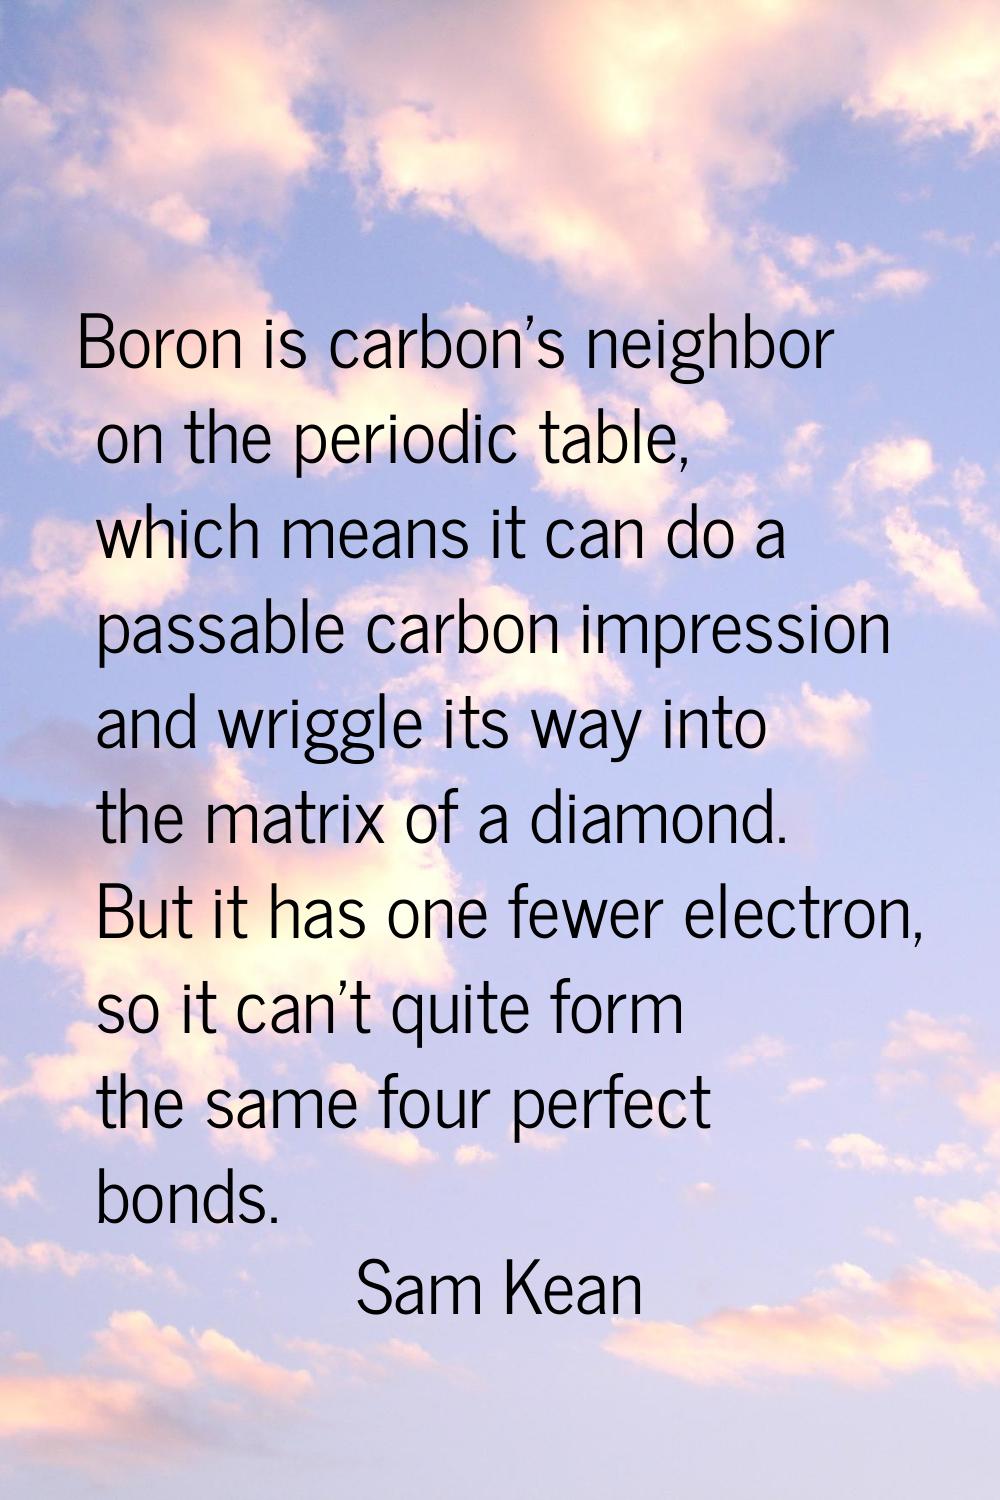 Boron is carbon's neighbor on the periodic table, which means it can do a passable carbon impressio